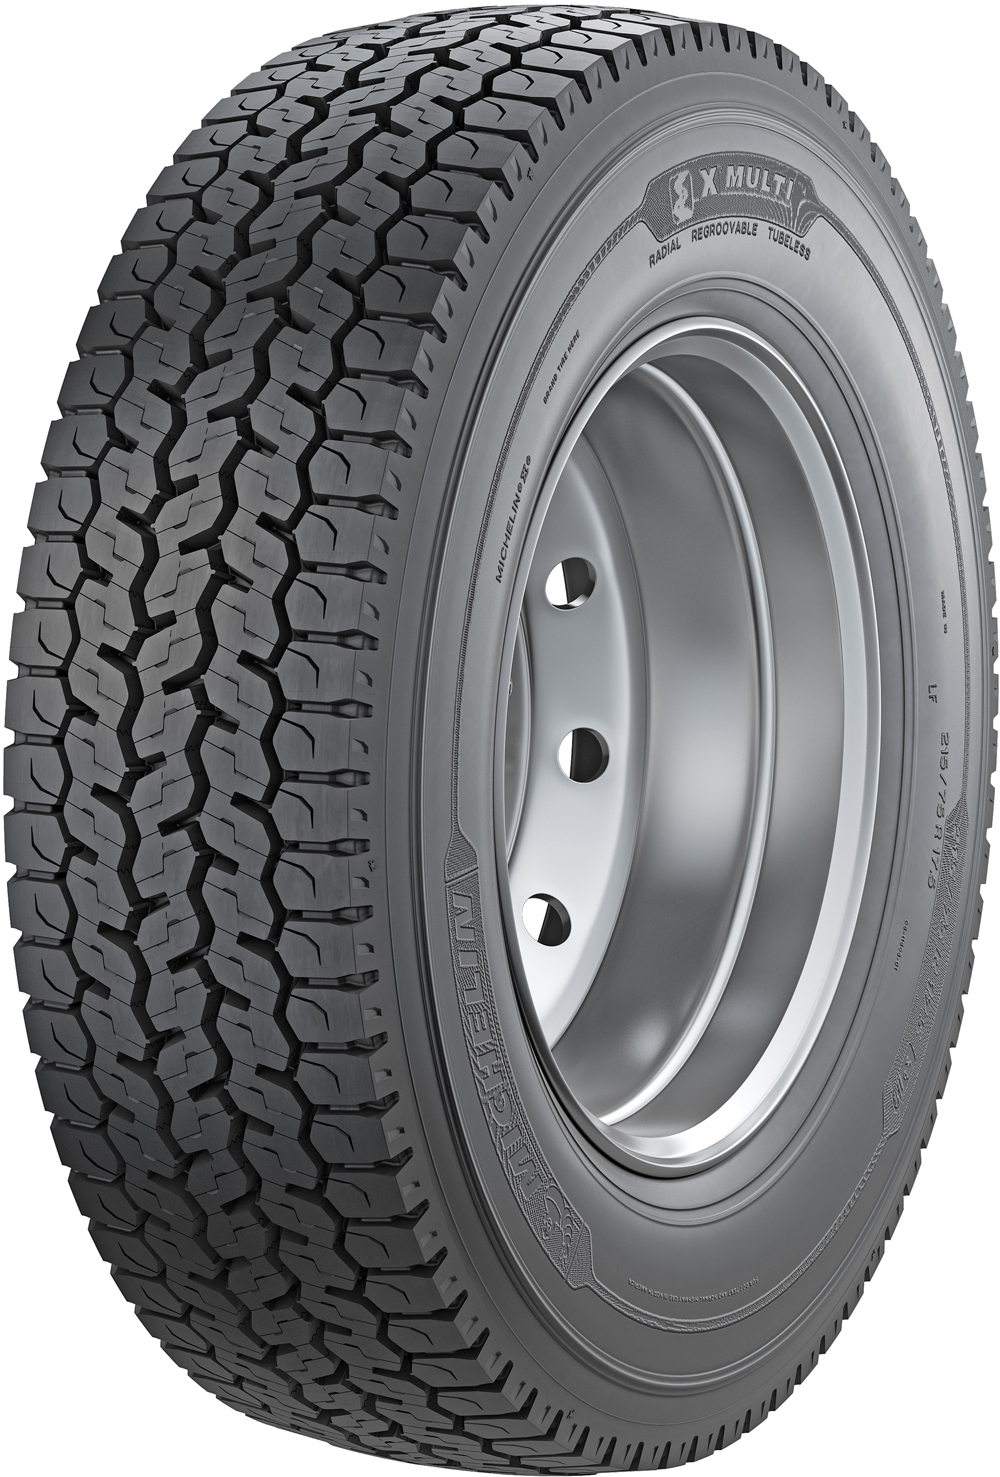 product_type-heavy_tires MICHELIN X MULTI D VG 245/70 R17.5 136M